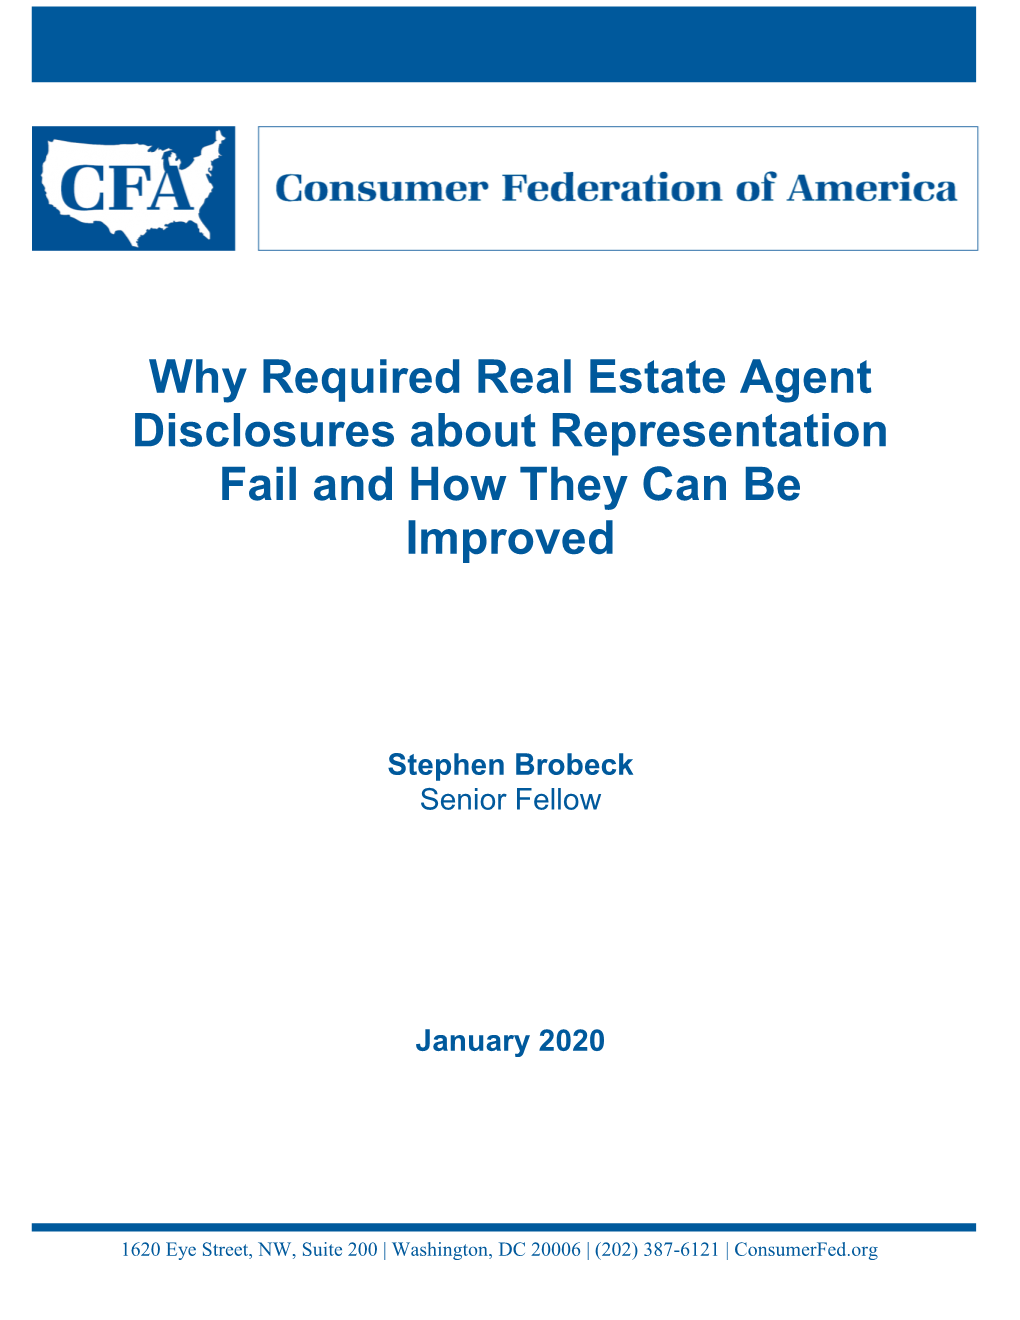 Why Required Real Estate Agent Disclosures About Representation Fail and How They Can Be